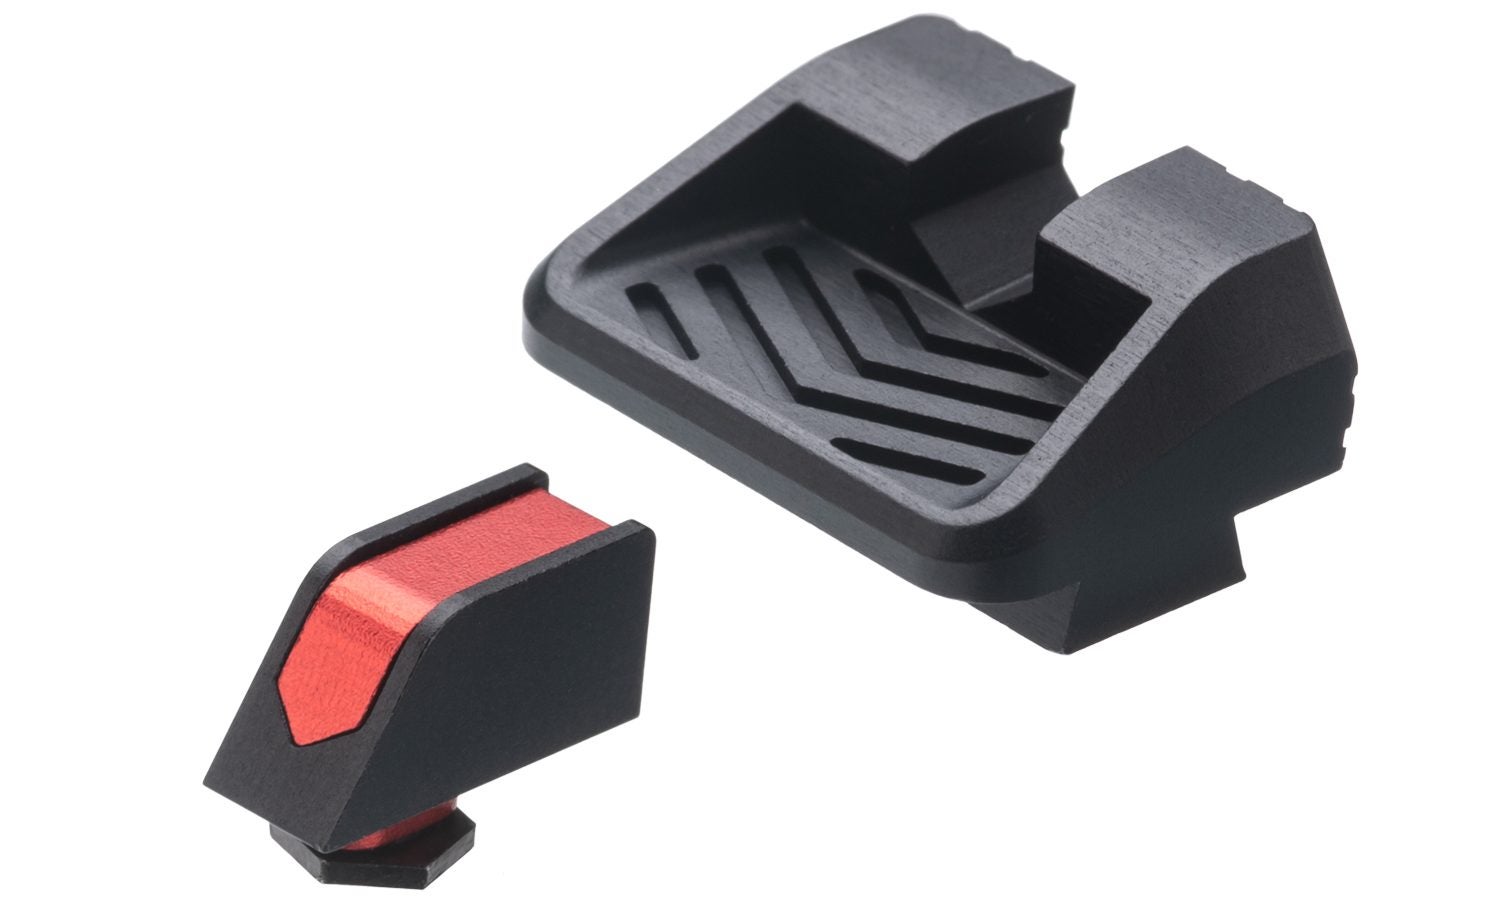 Tyrant Designs Drops New Previews of Its Two-Piece Glock Sights